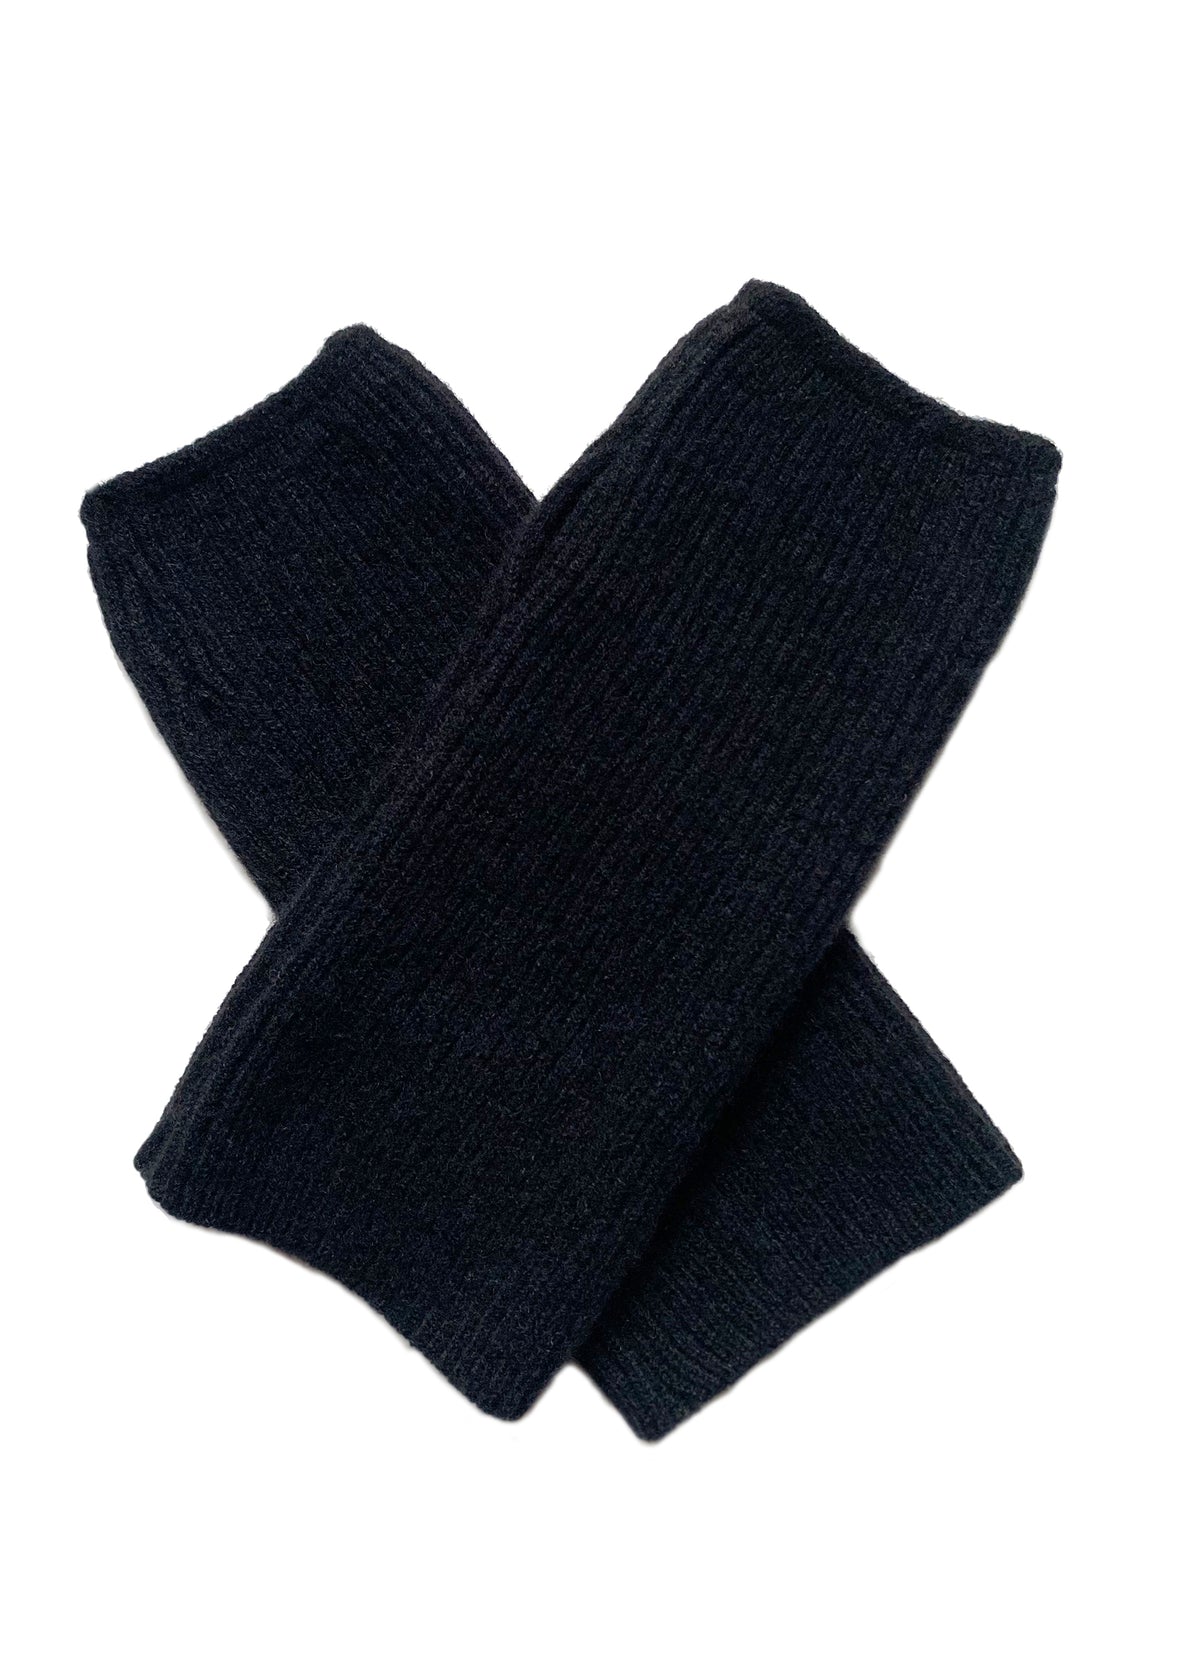 Recycled cashmere Arm Warmers | Black